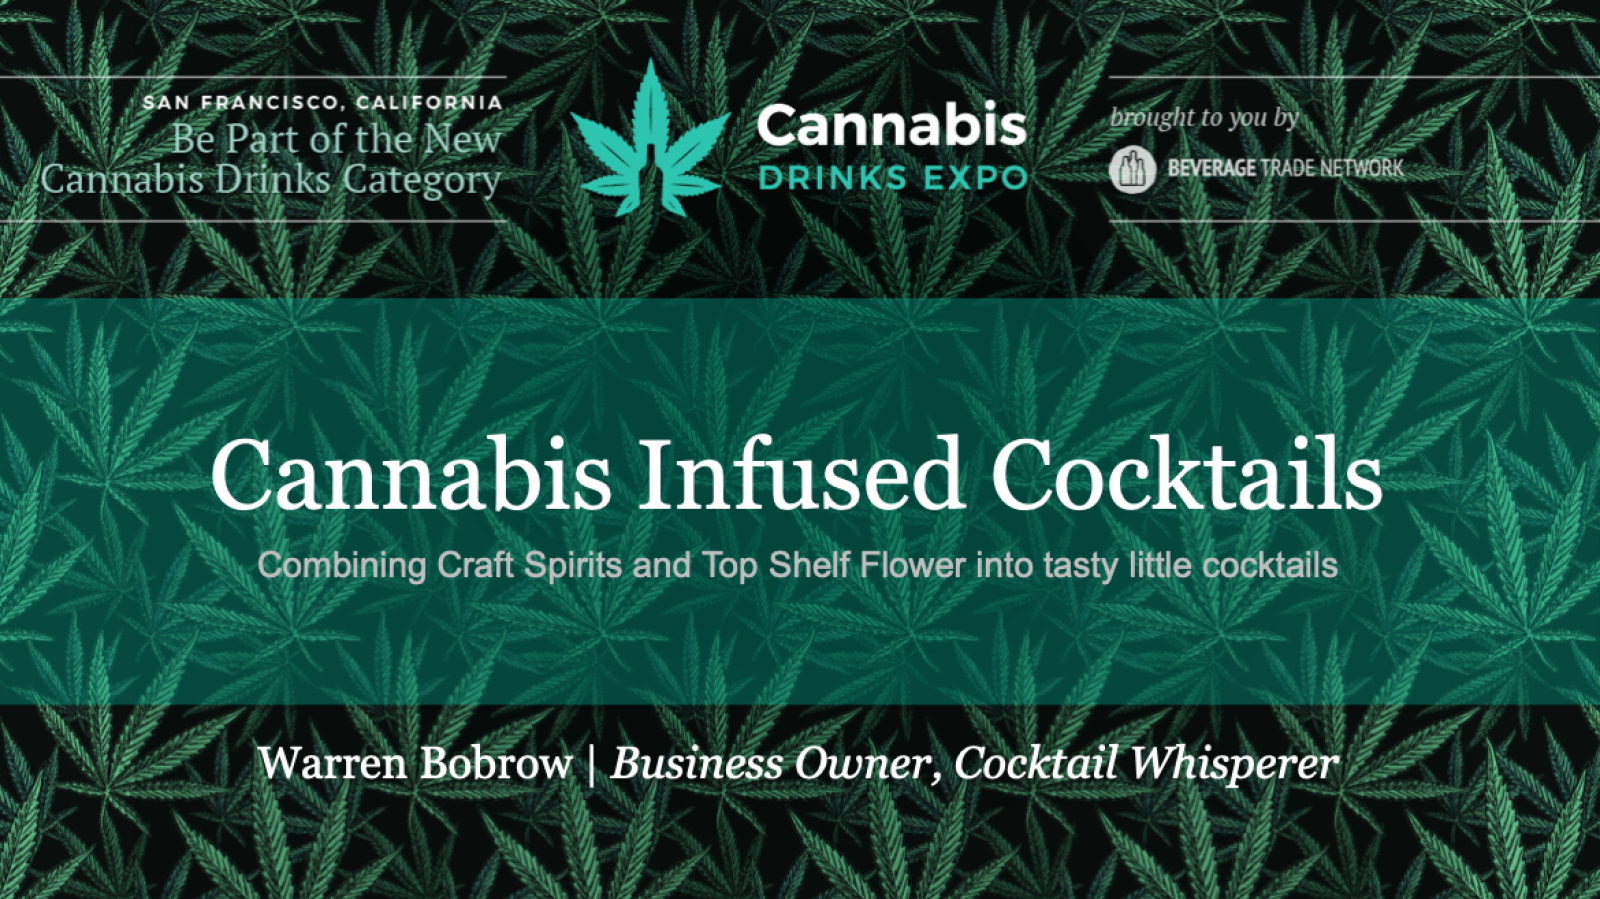 Photo for: Cannabis Infused Cocktails: Presented at Cannabis Drink Expo